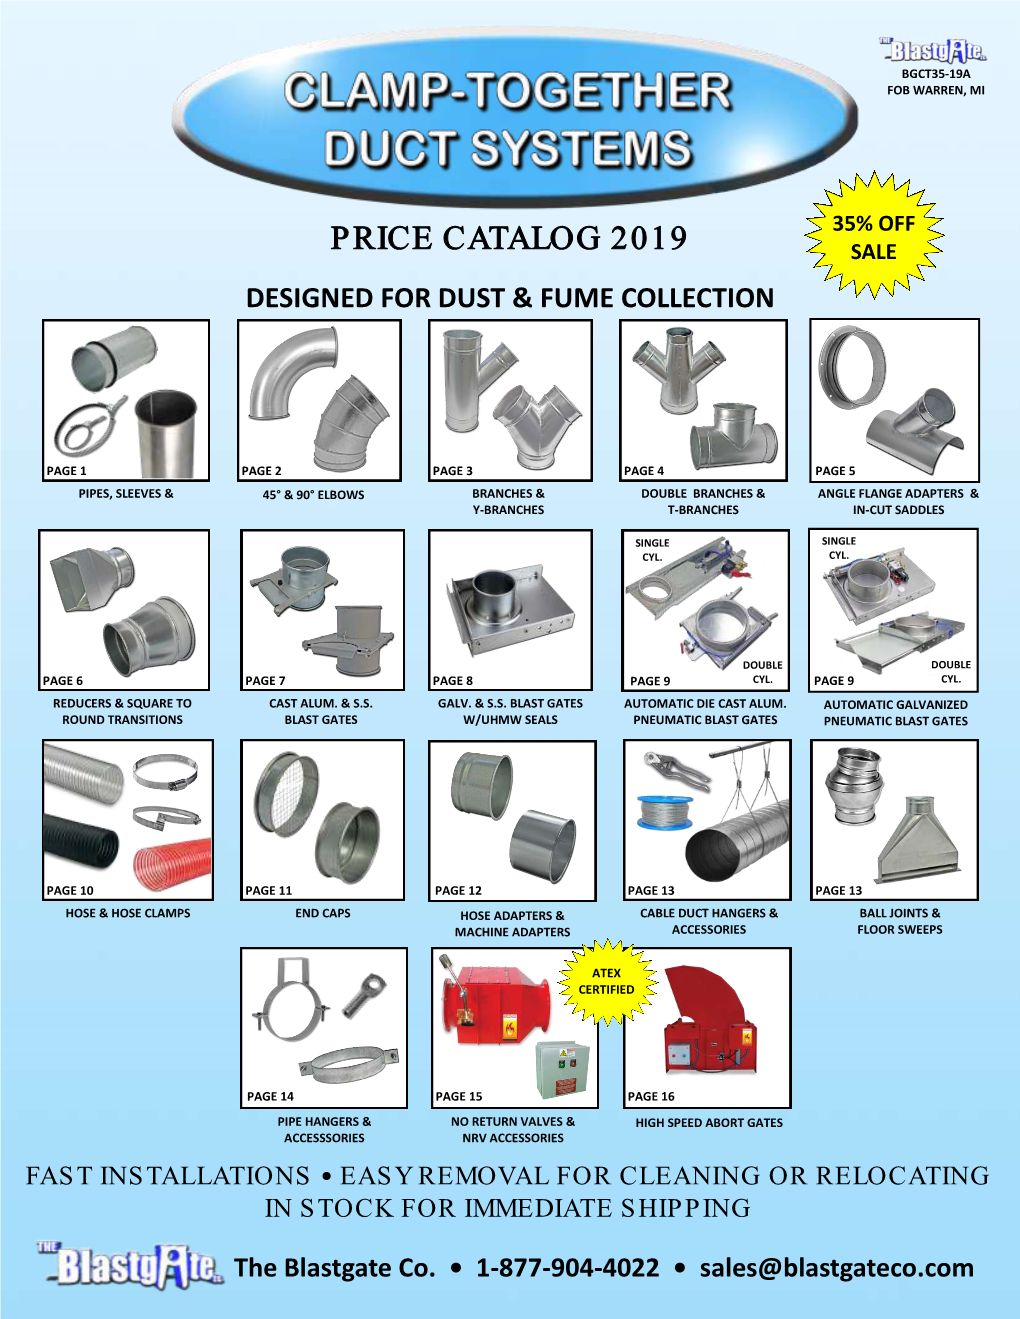 Price Catalog 2019 Sale Designed for Dust & Fume Collection